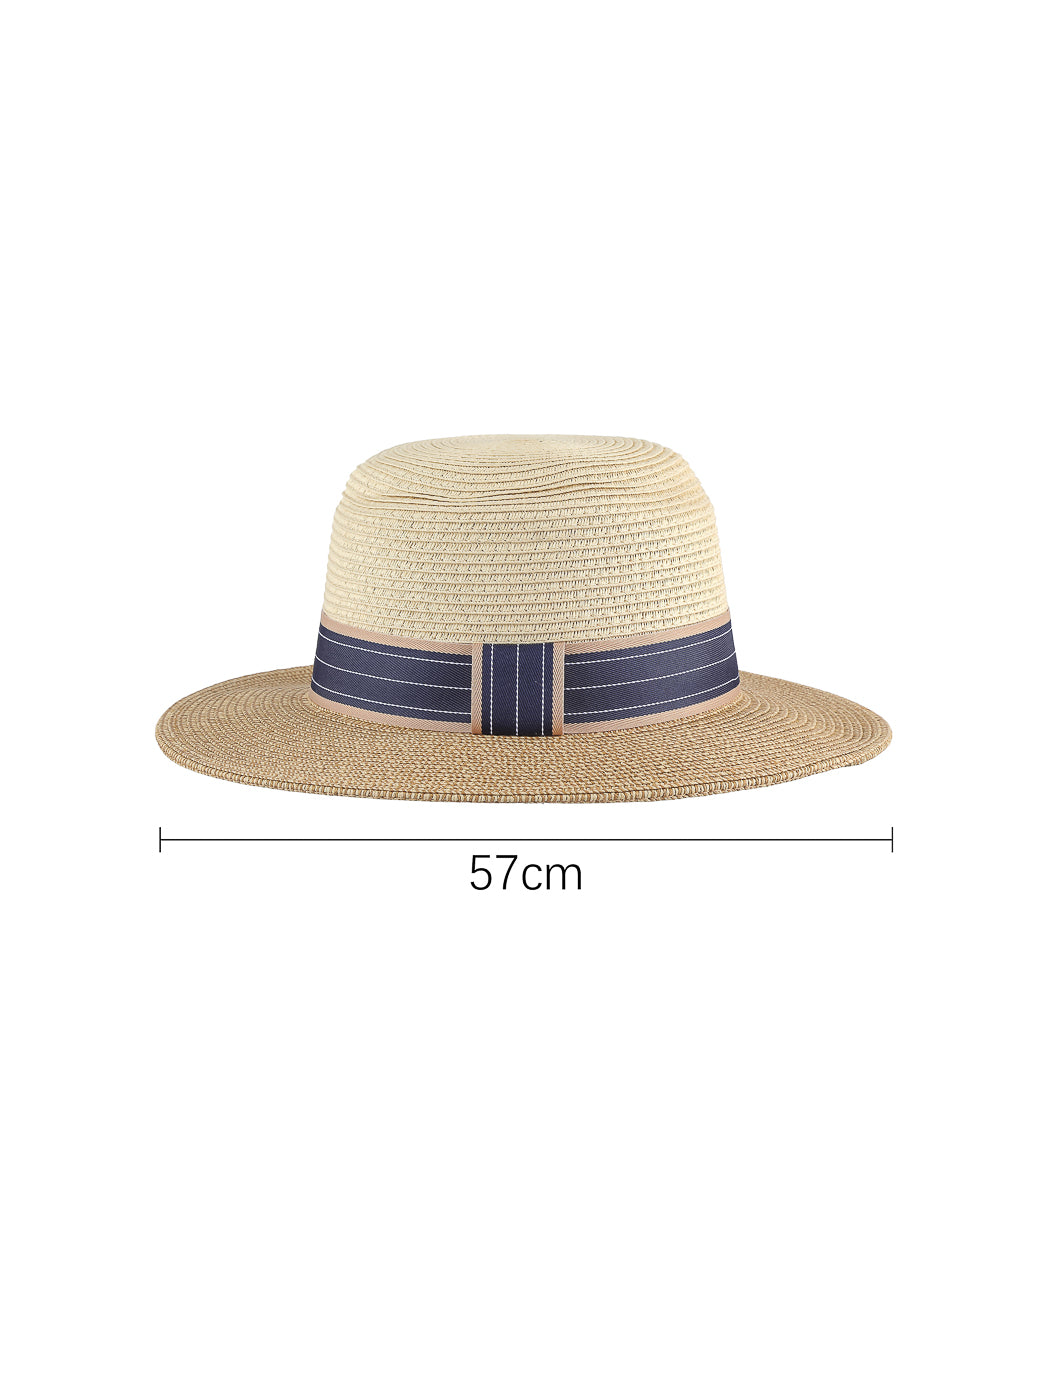 MINISO BRITISH STYLE BICOLOR STRAW HAT WITH FLAT TOP ( KHAKI ) 2010116811108 FASHIONABLE HAT